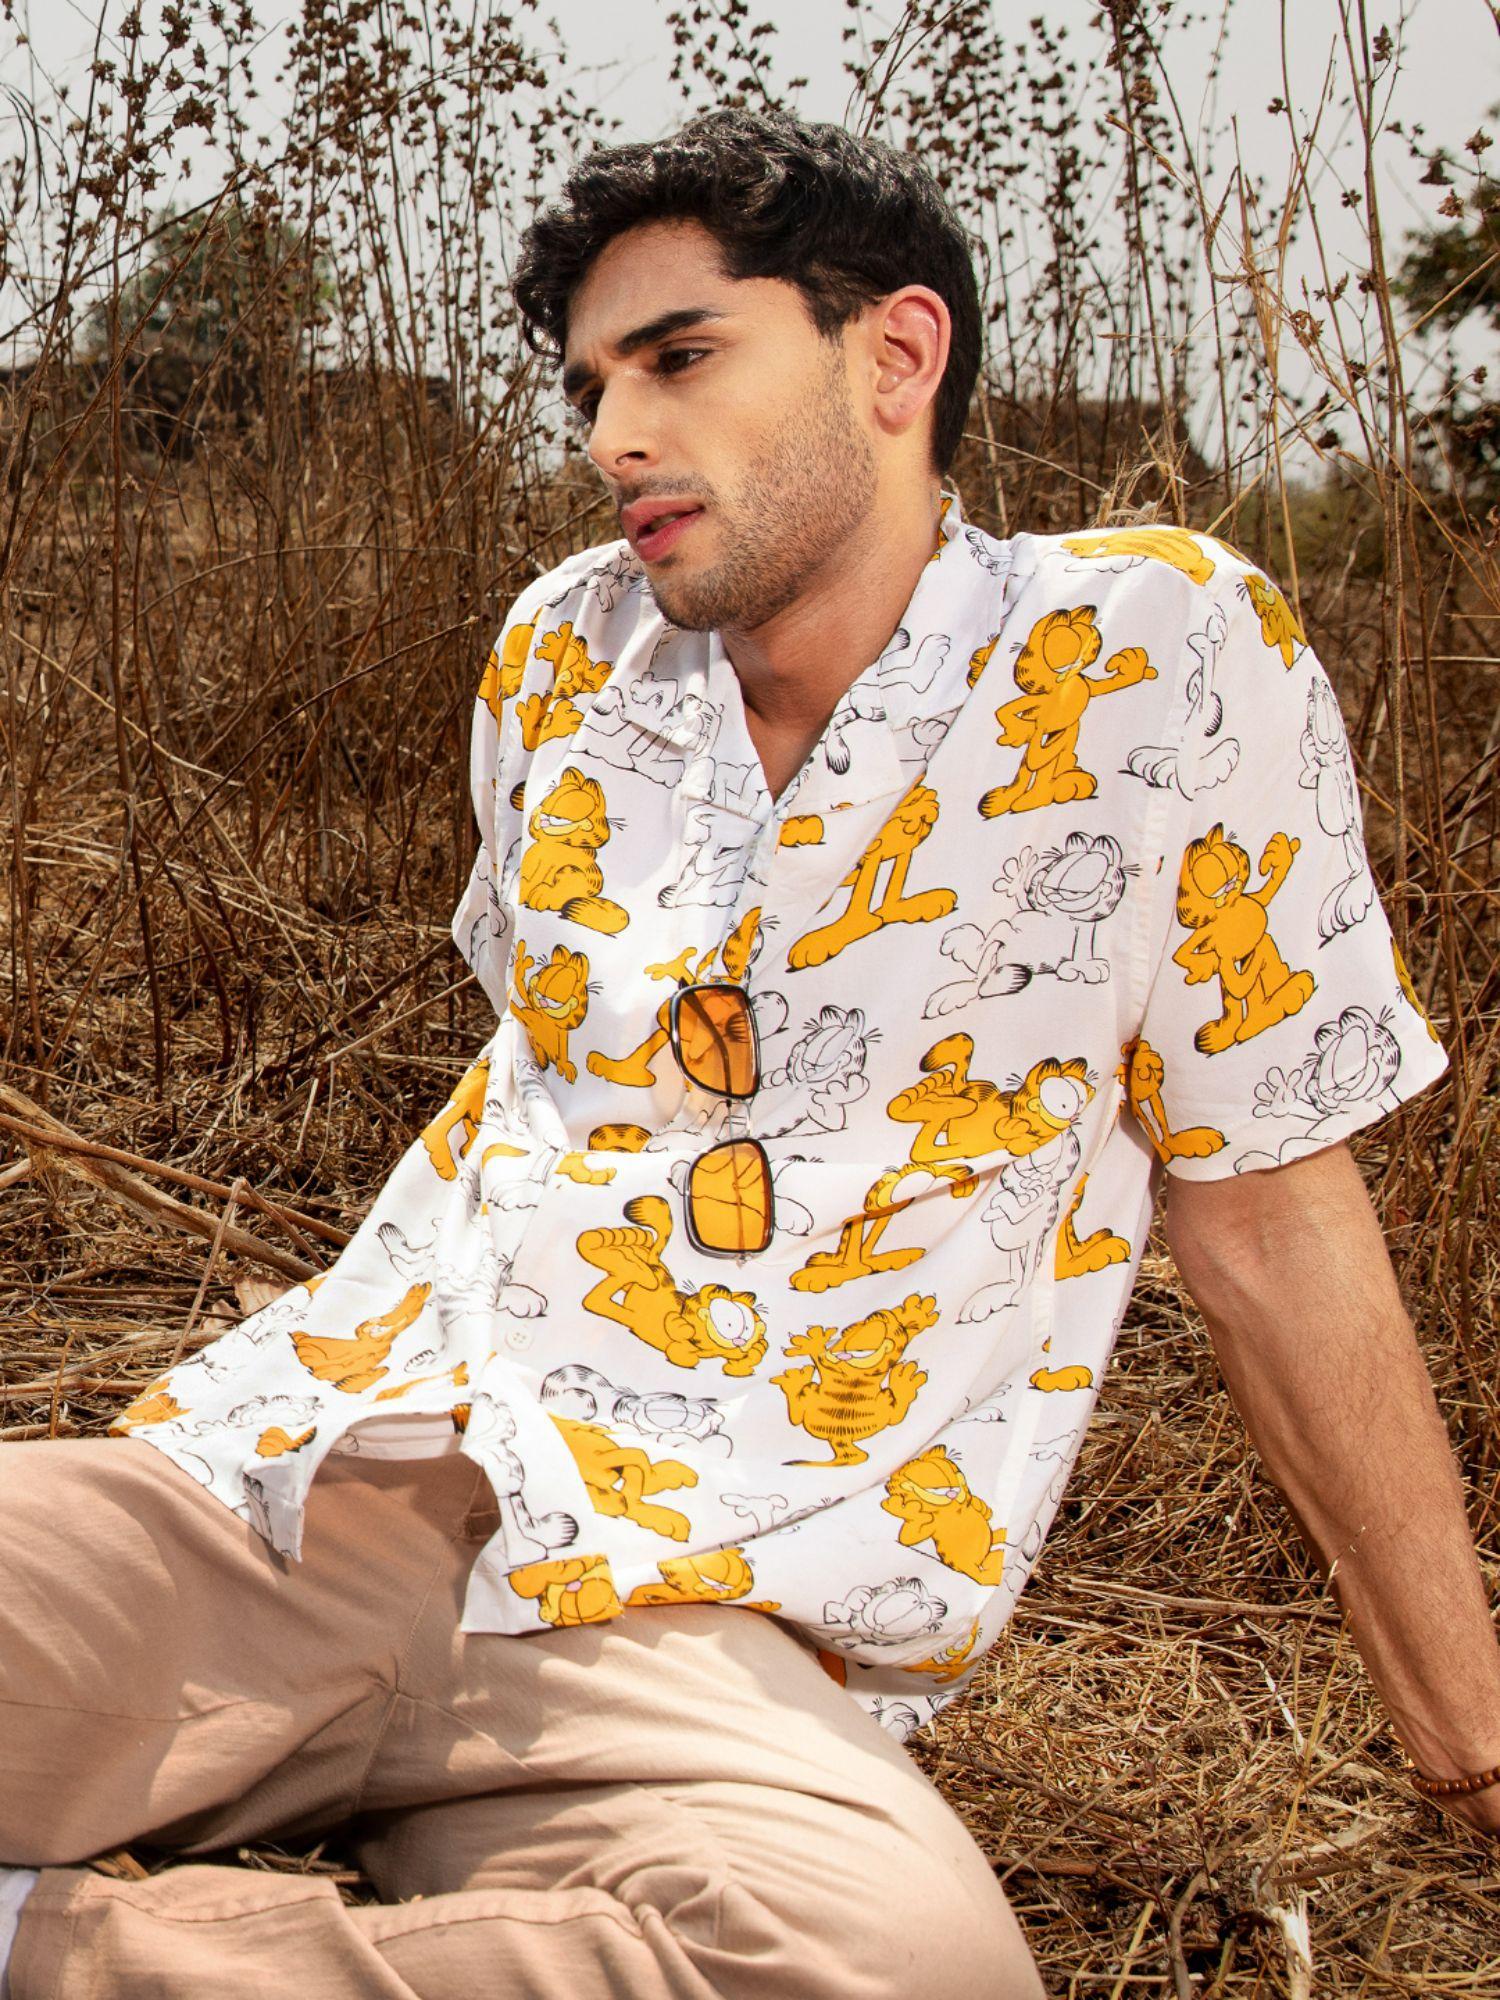 official garfield: made to lounge men holiday shirts